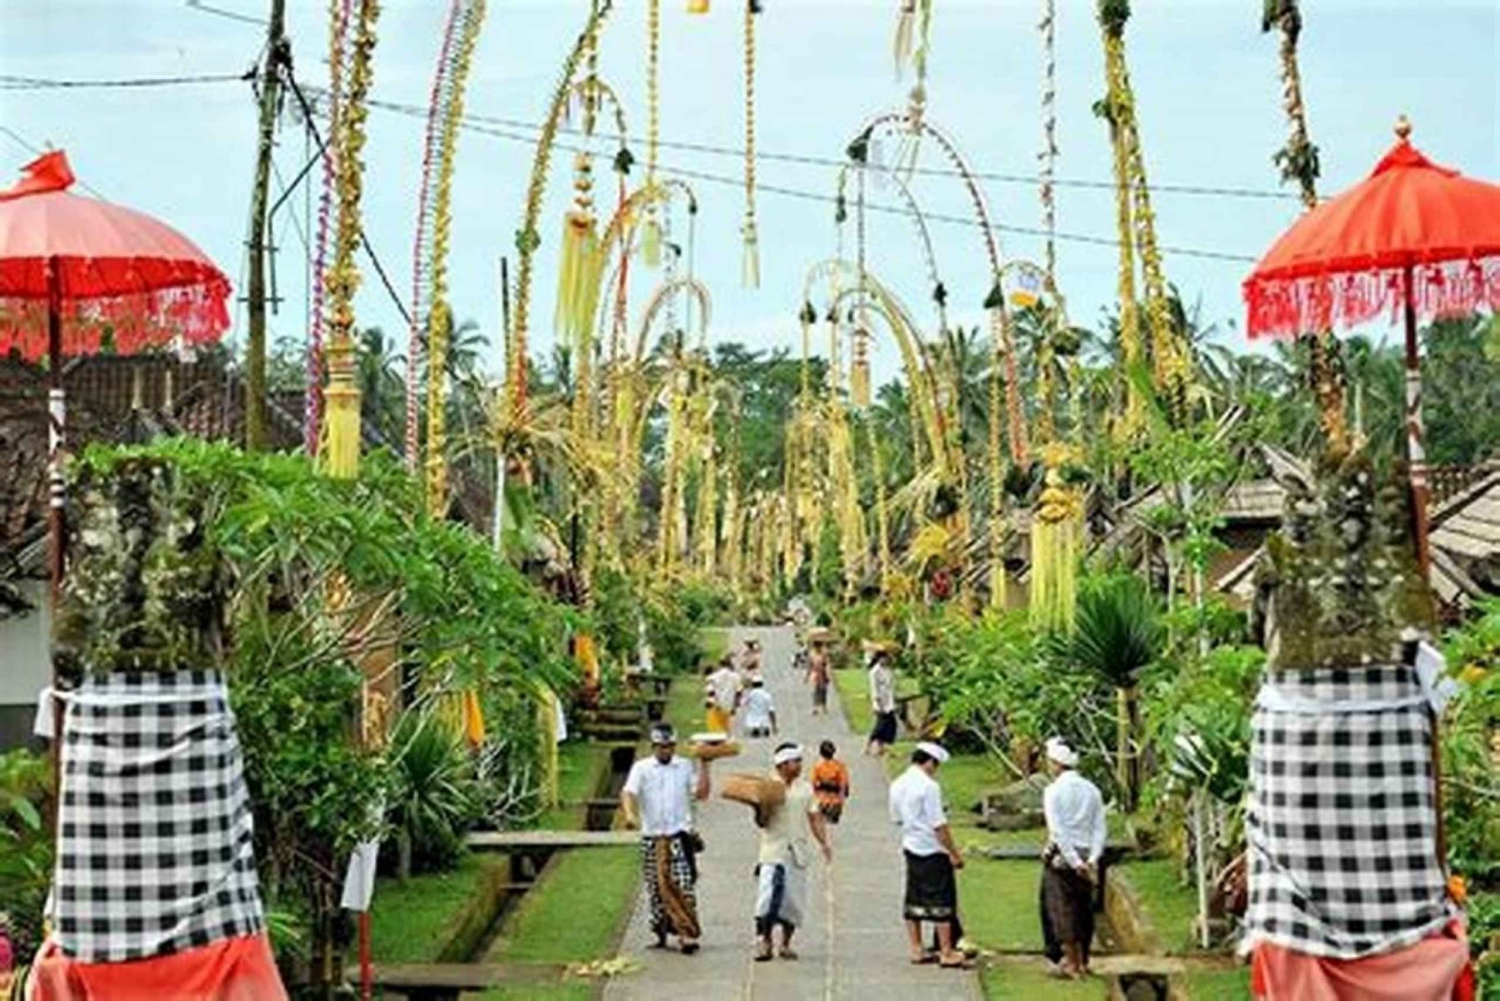 All inclusive: Ubud Highlights Private Guided Tours